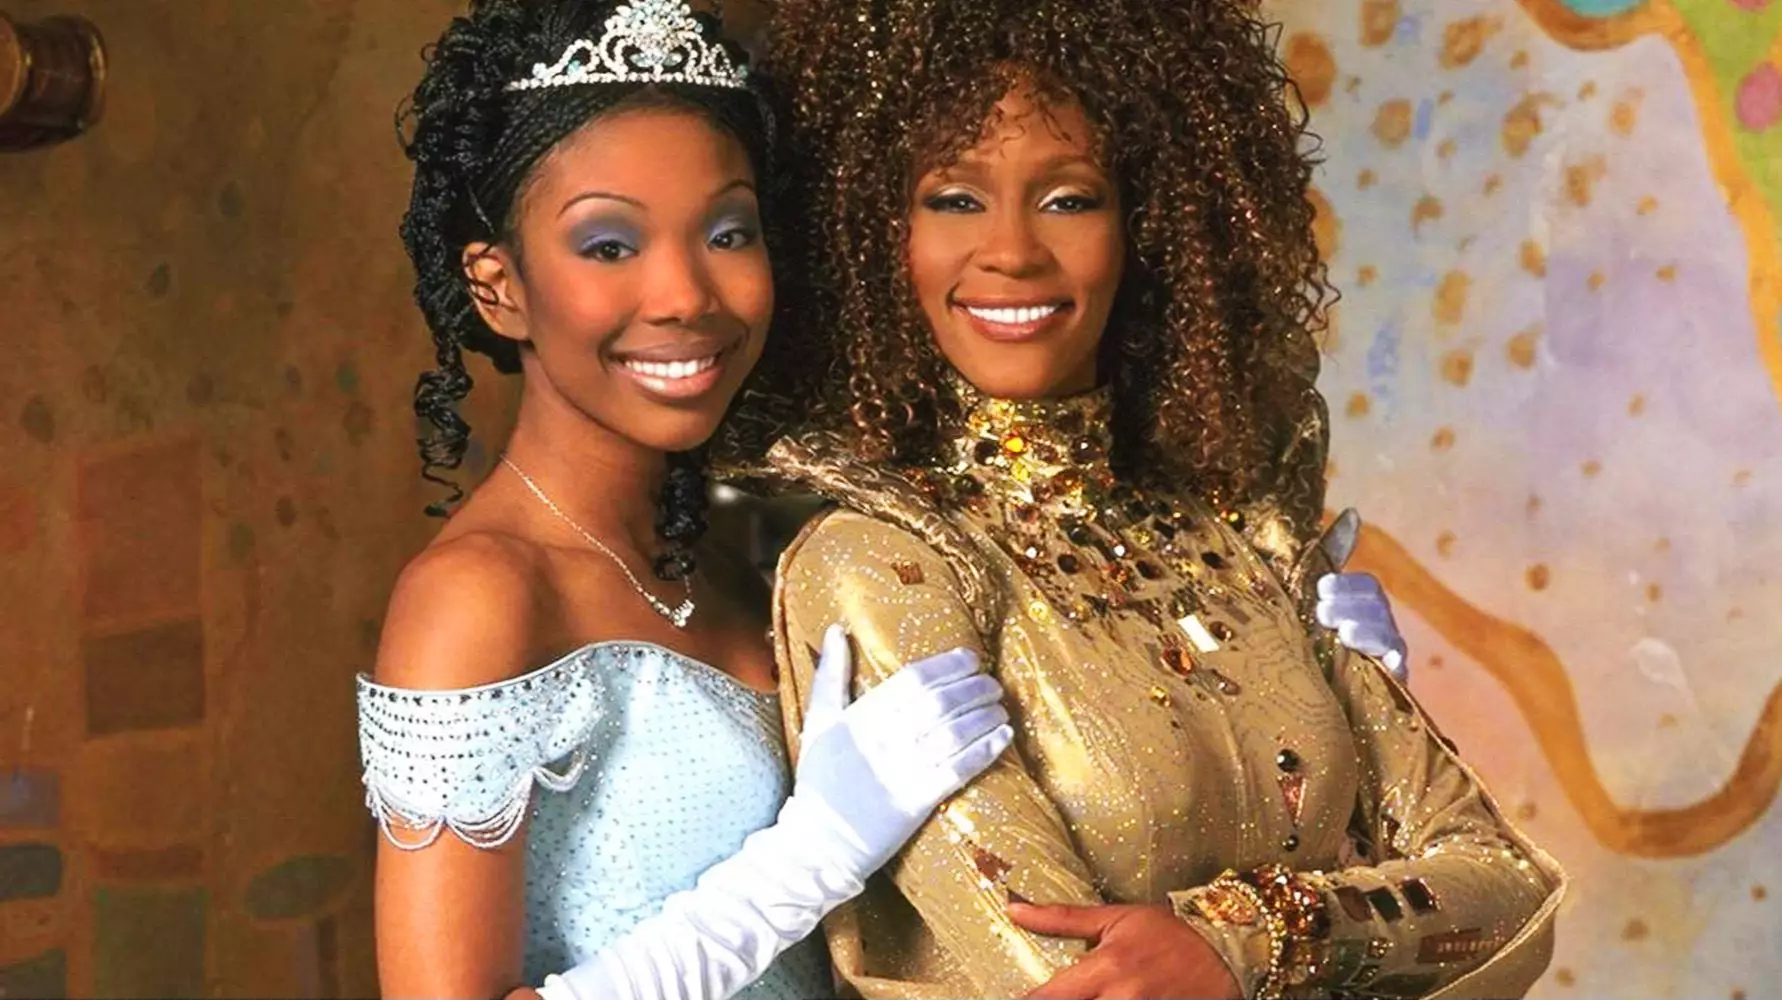 Rodgers & Hammerstein's Cinderella: Brandy And Whitney Houston's Cinderella is Coming to Disney+